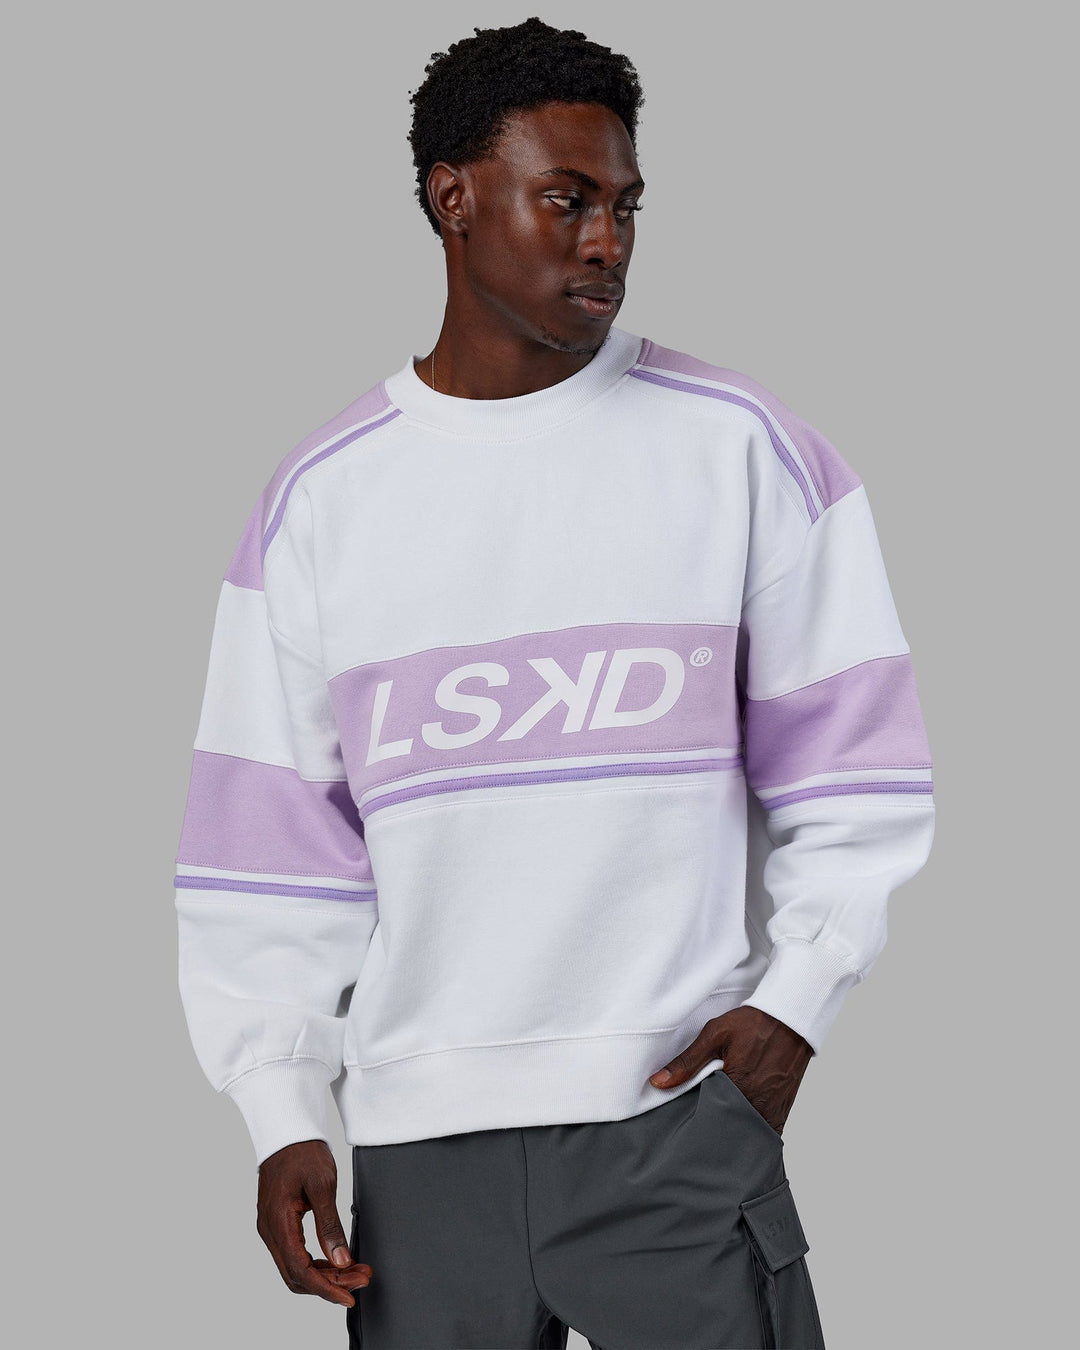 Man wearing Unisex A-Team Sweater Oversize - White-Pale Lilac